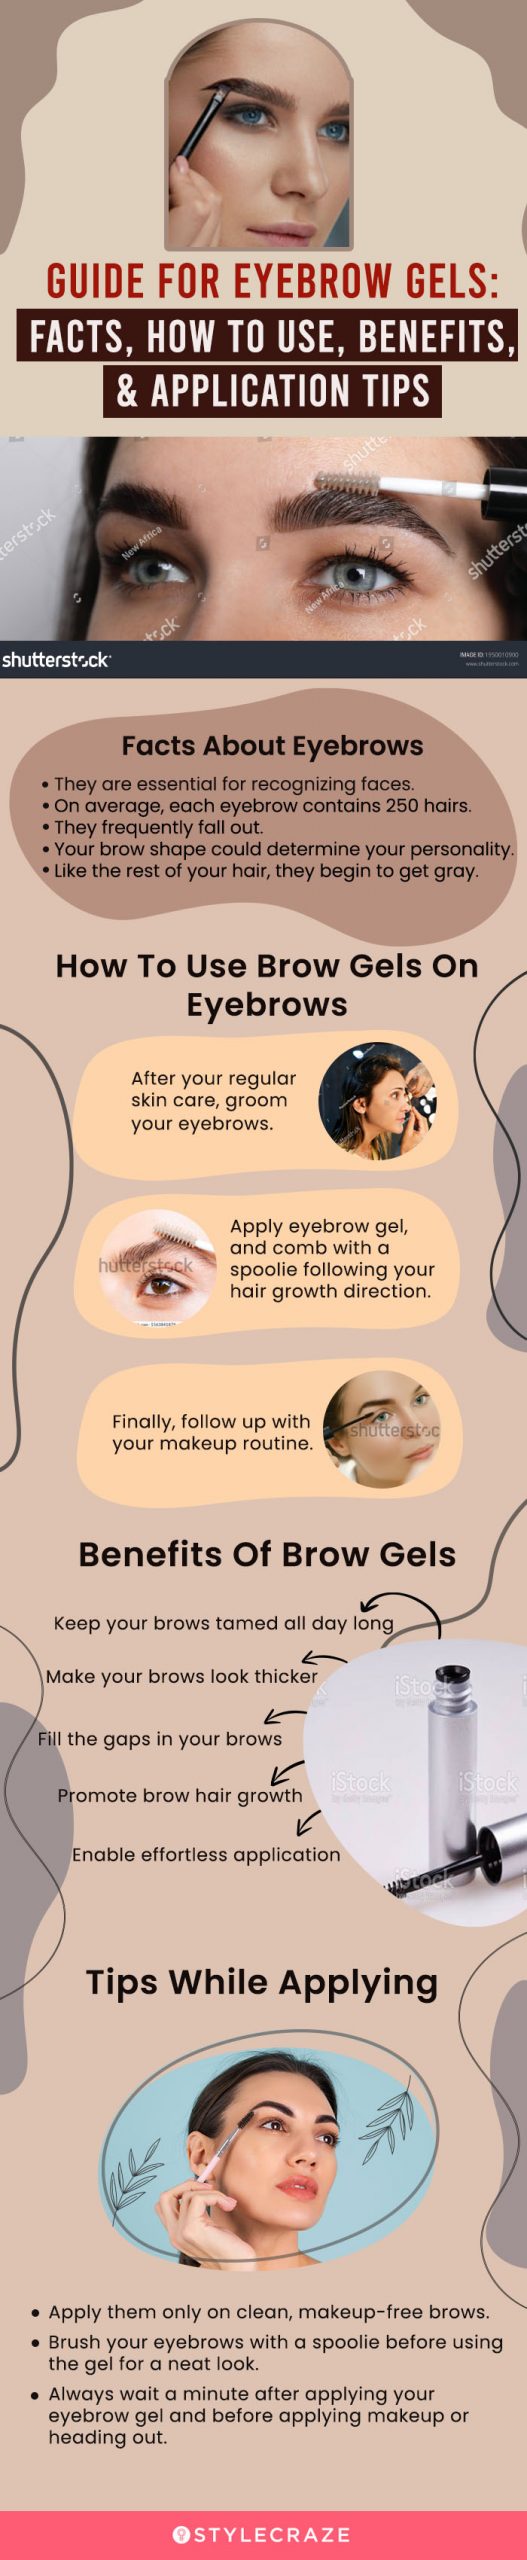 Guide For Eyebrow Gels: How To Use, Application Tips (infographic)